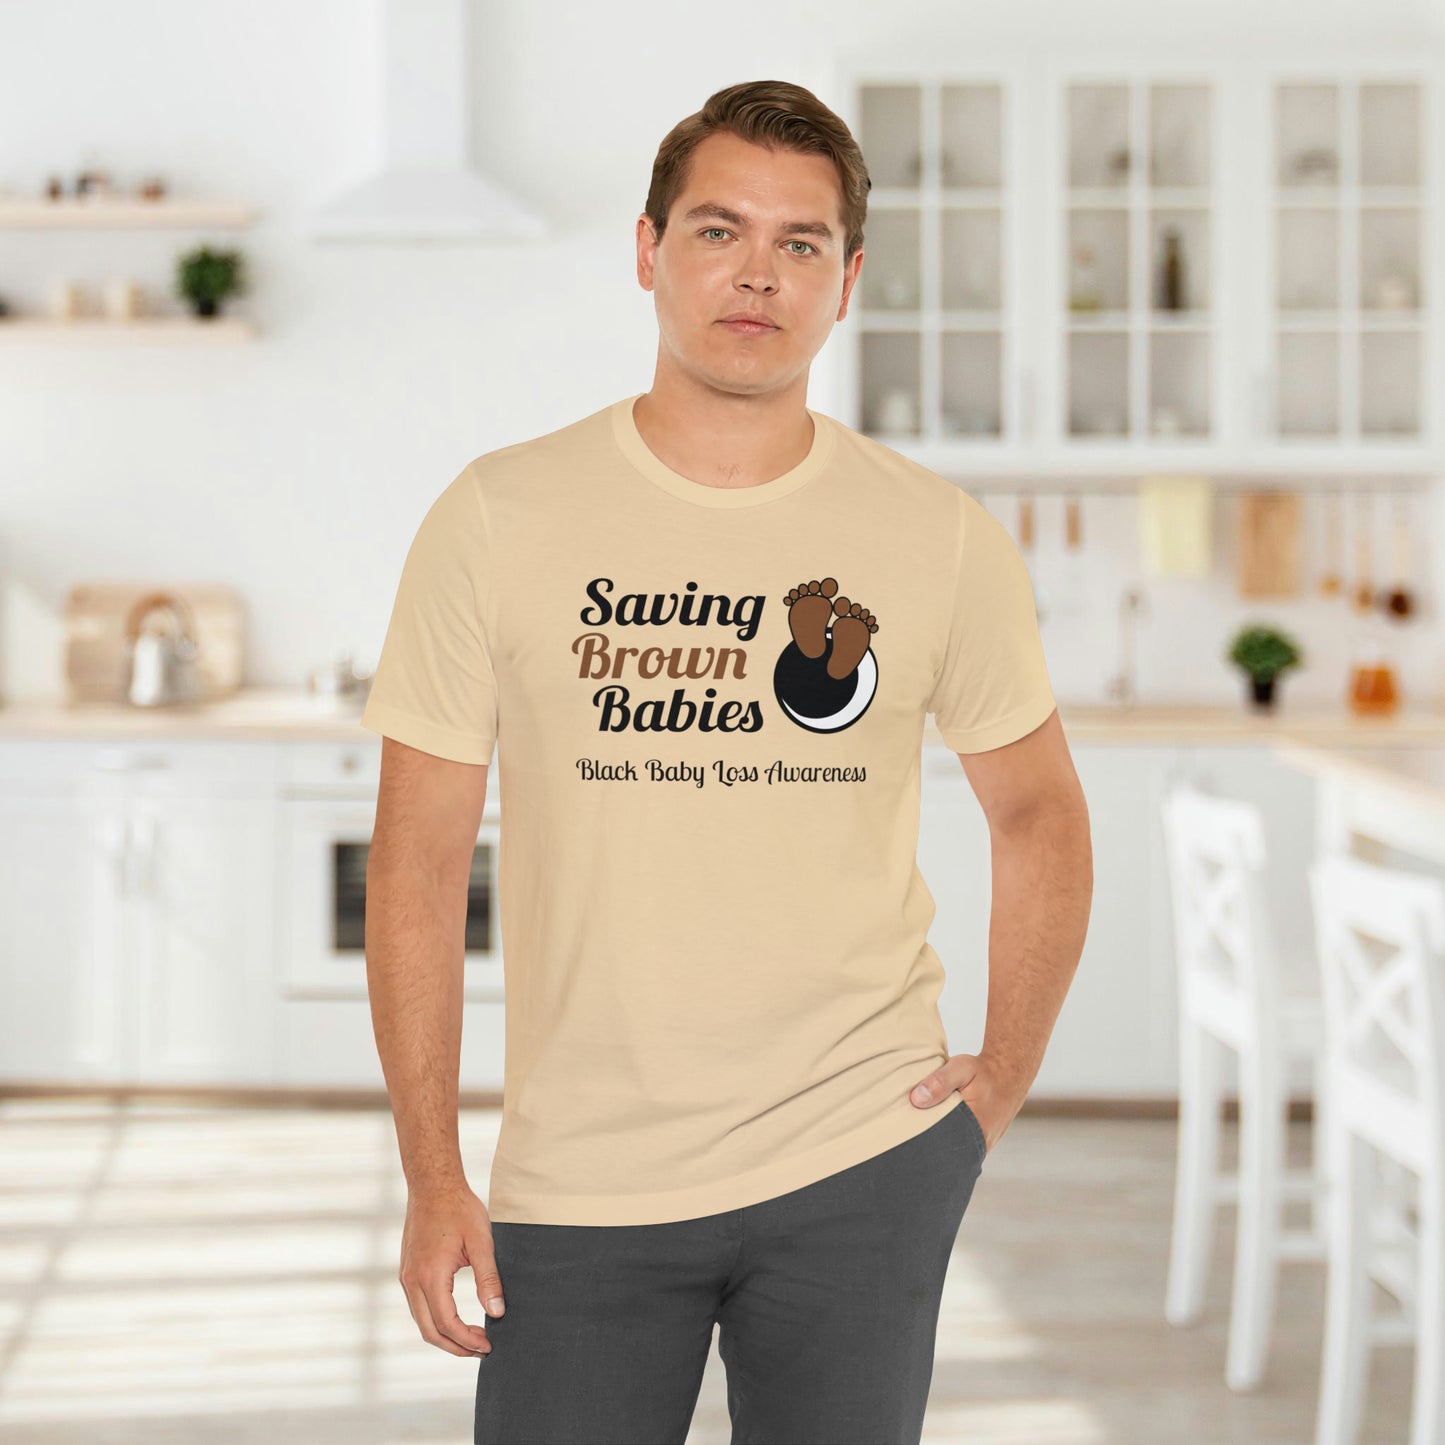 Quietly United in Loss Together Non-Profit / Saving Brown Babies Charity Tee, Pregnancy & Infant Loss Awareness